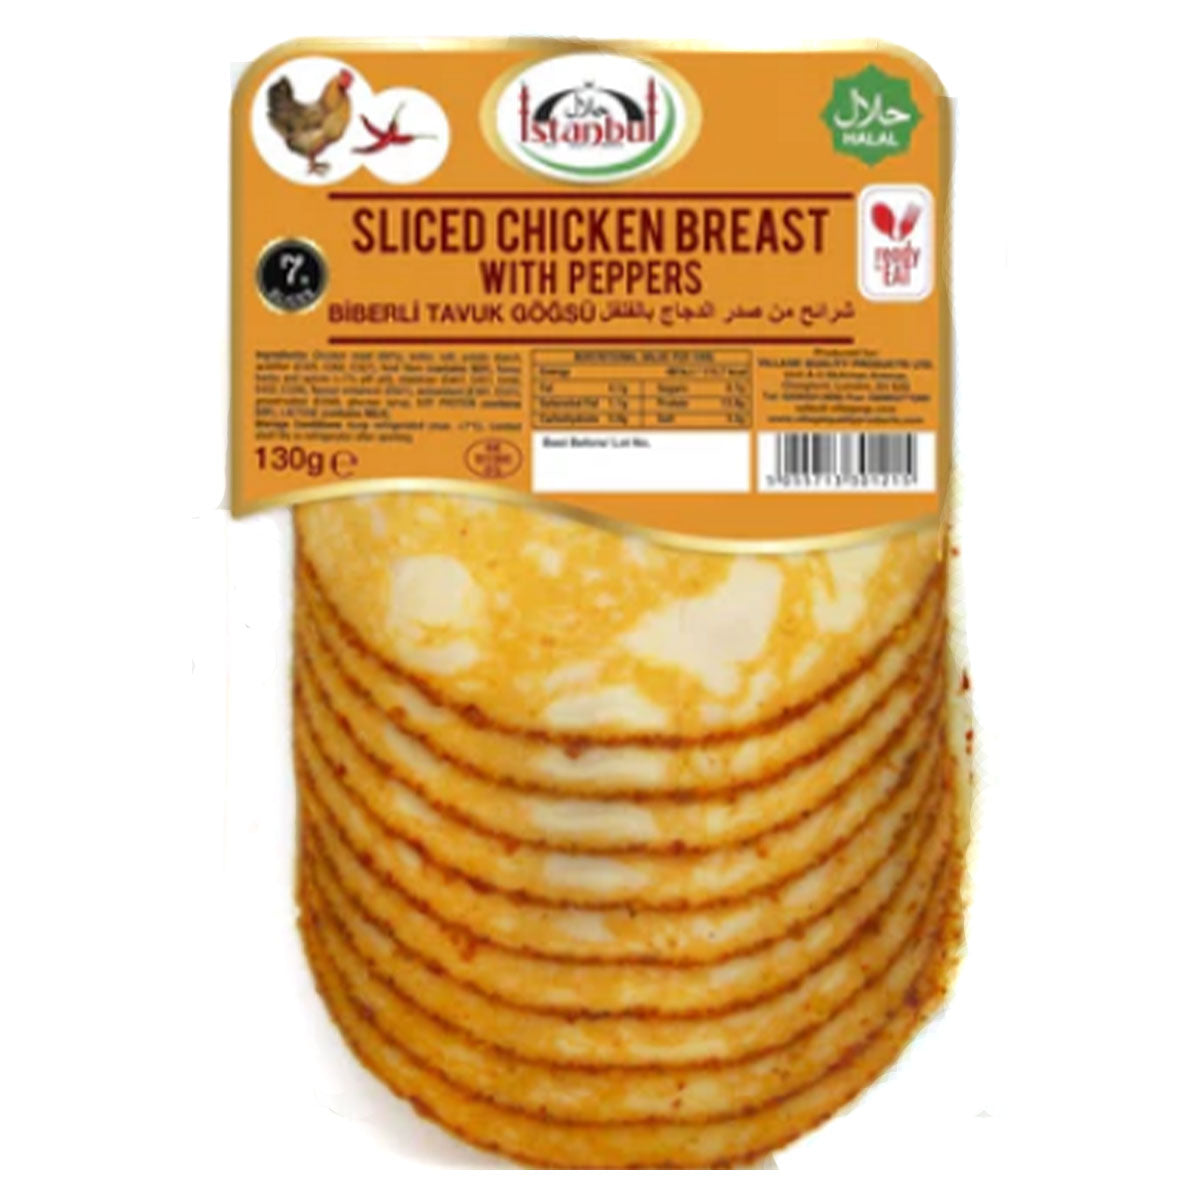 Istanbul - Sliced Chicken Breast With Peppers - 130g - Continental Food Store